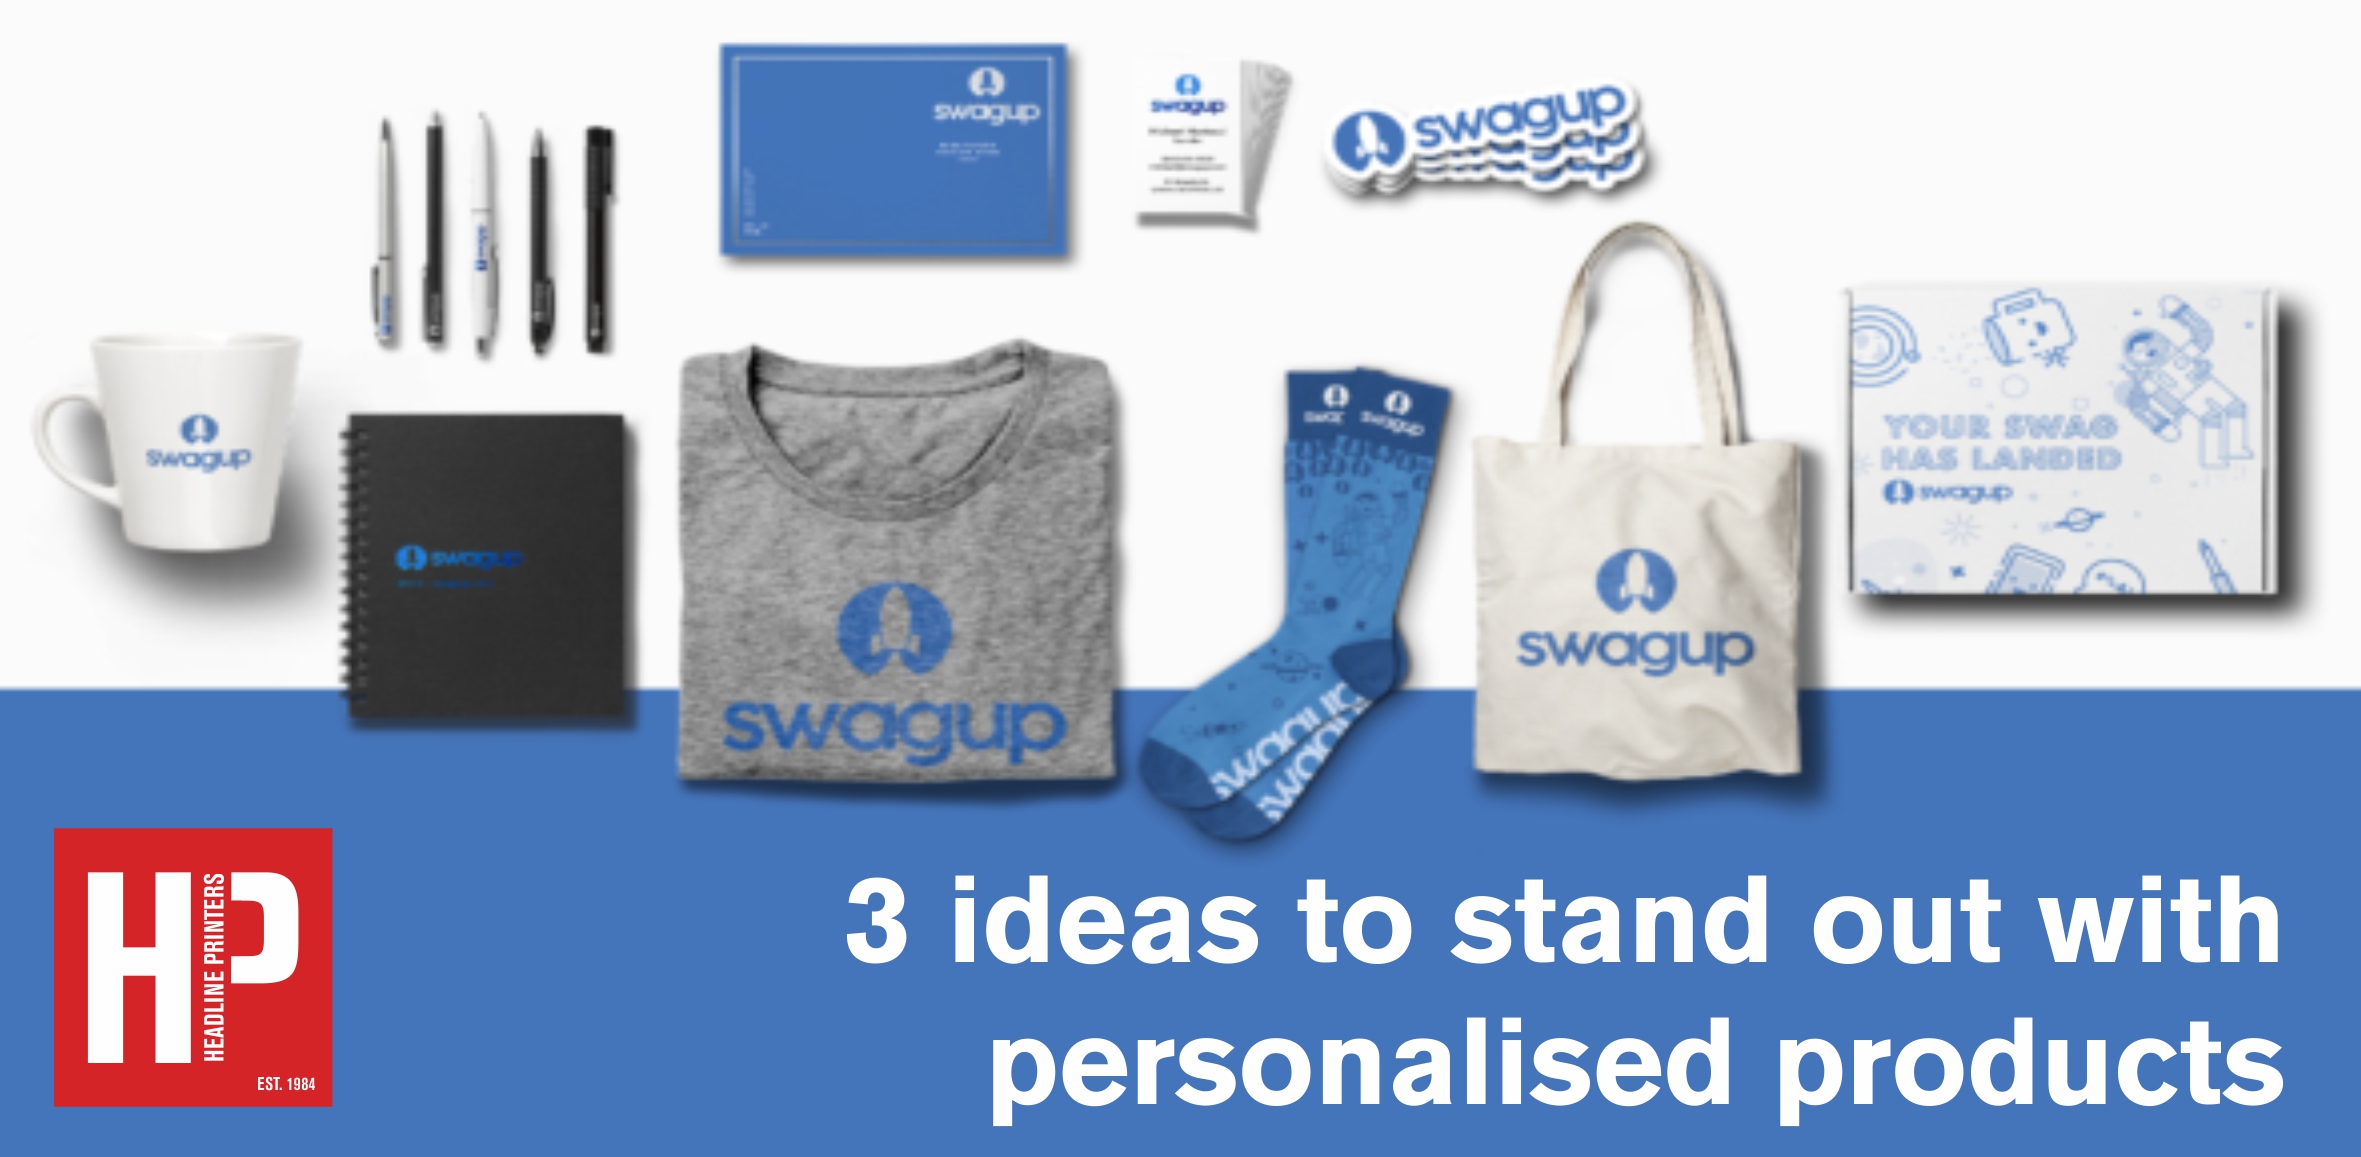 3 Ideas to stand out with personalised products